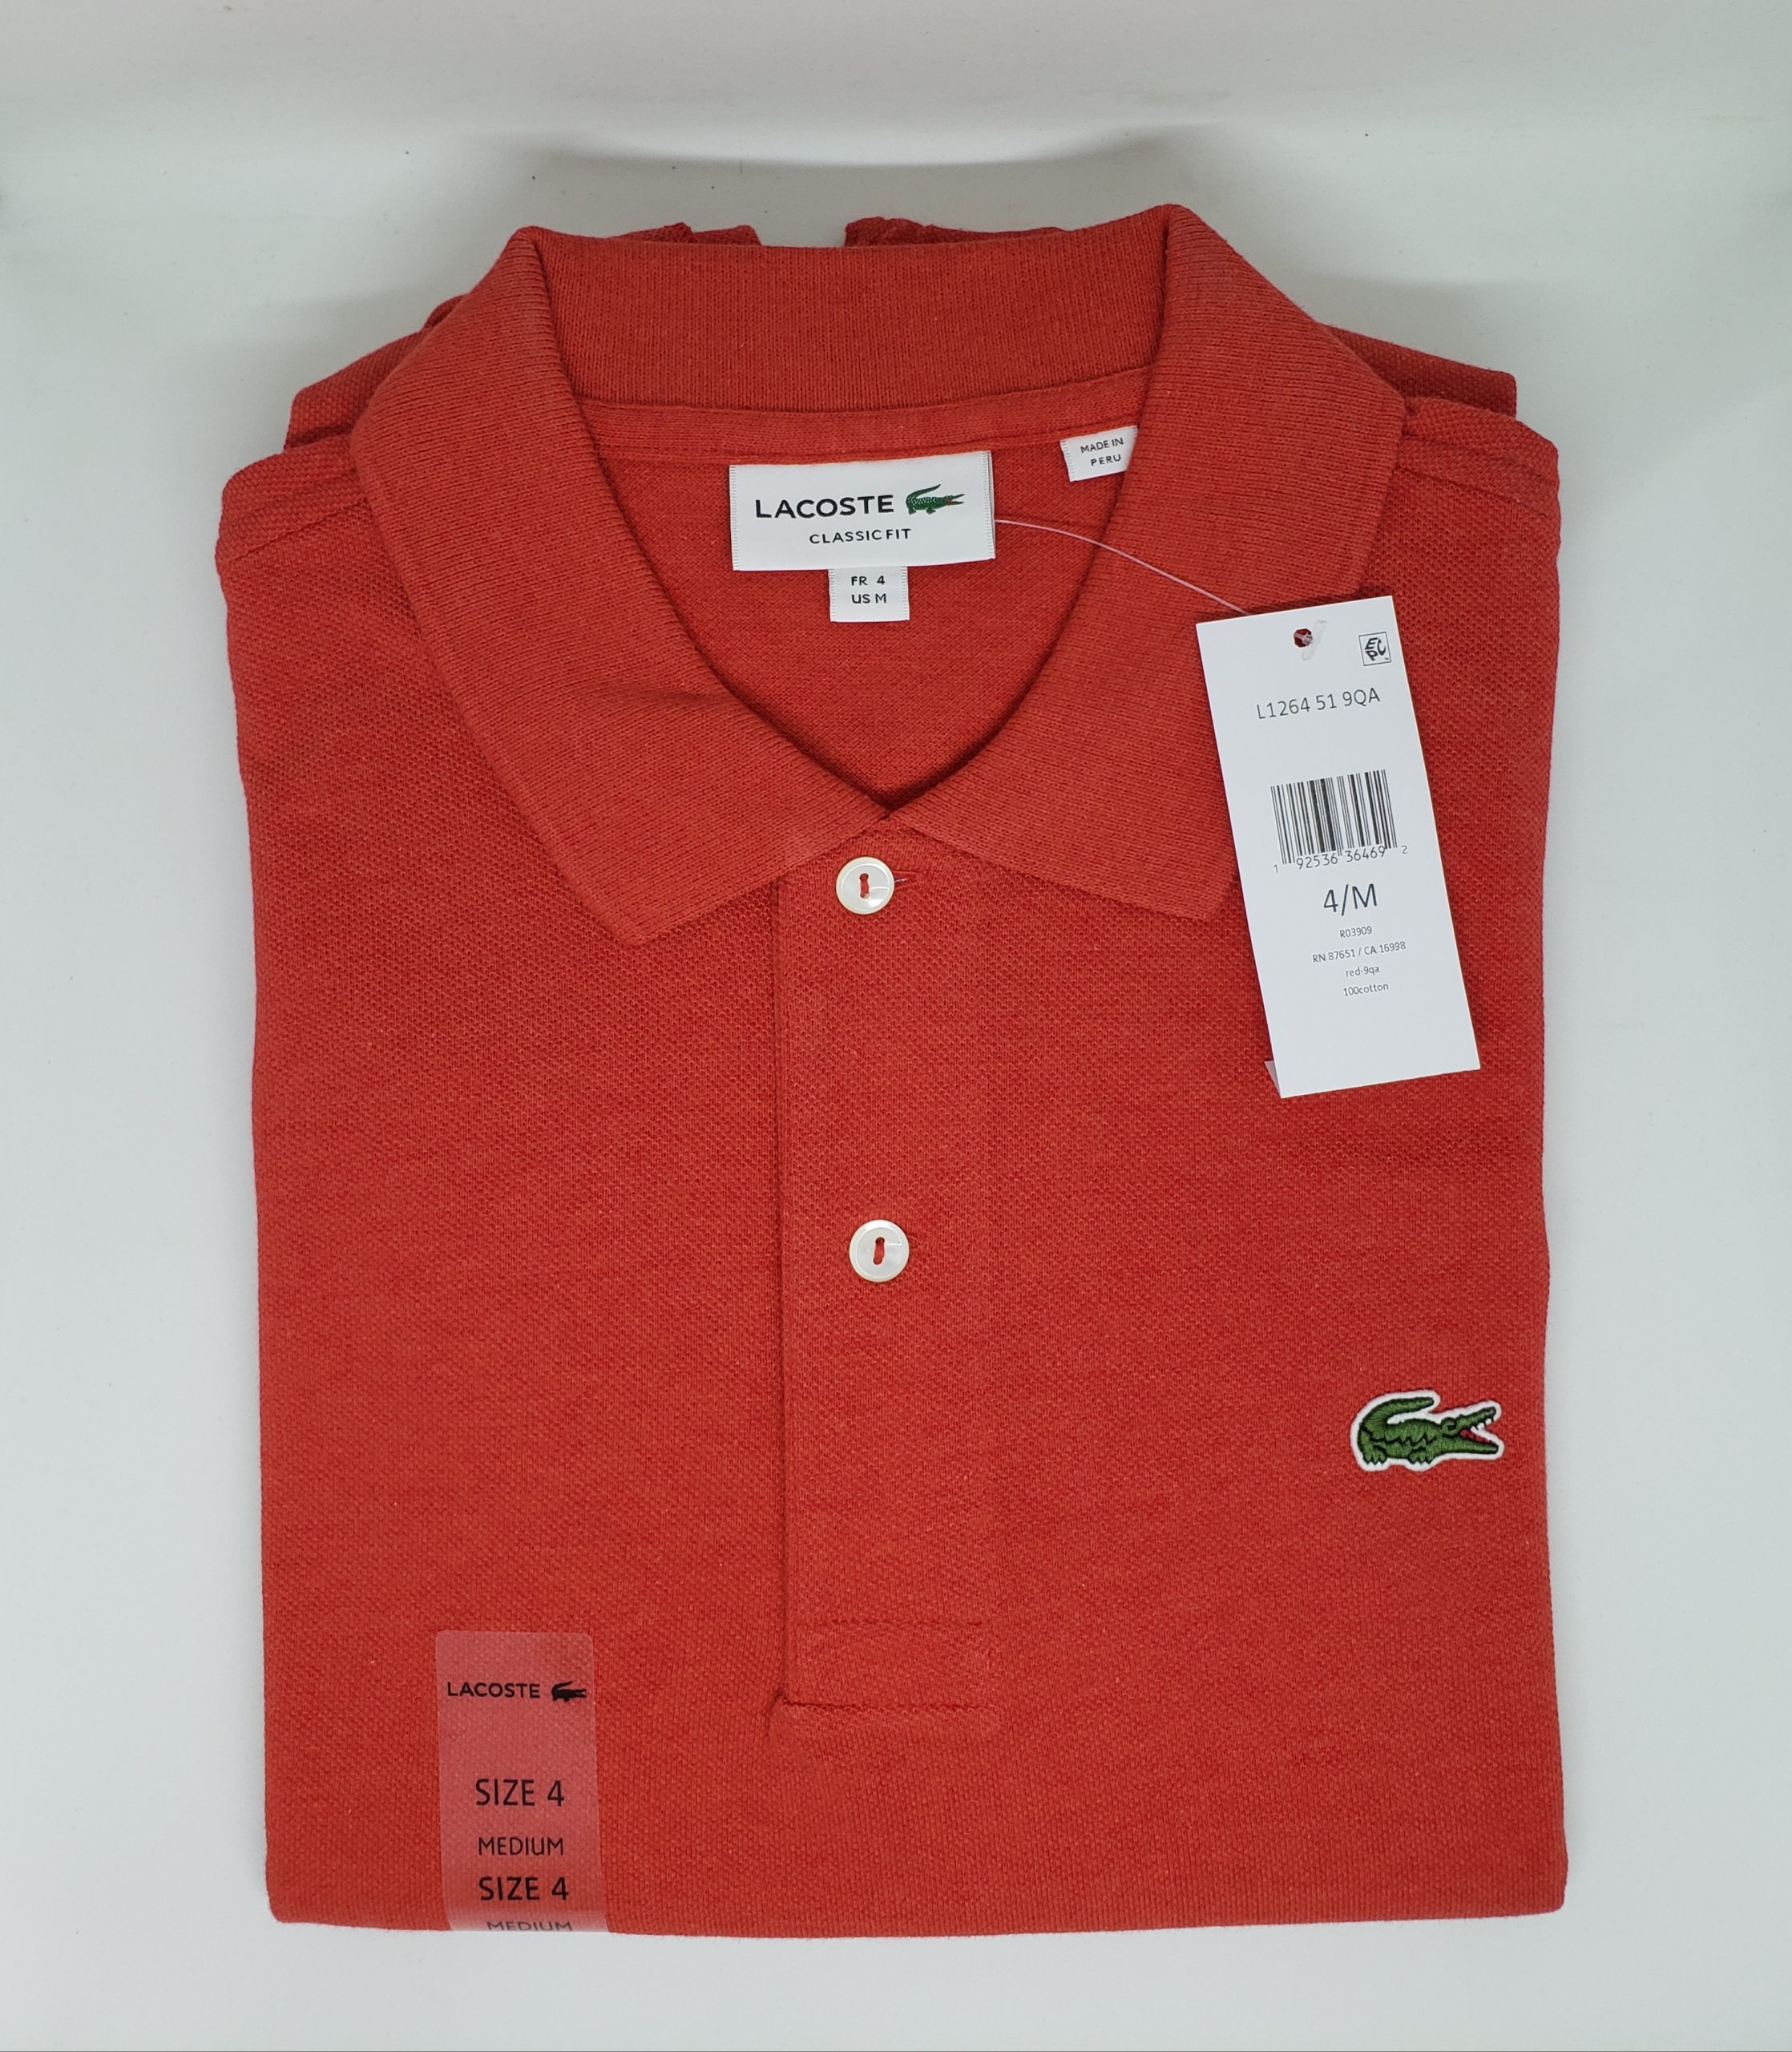 Lacoste Clasic Fit Shirts 100% cotton. SNSGIFTS4ALL